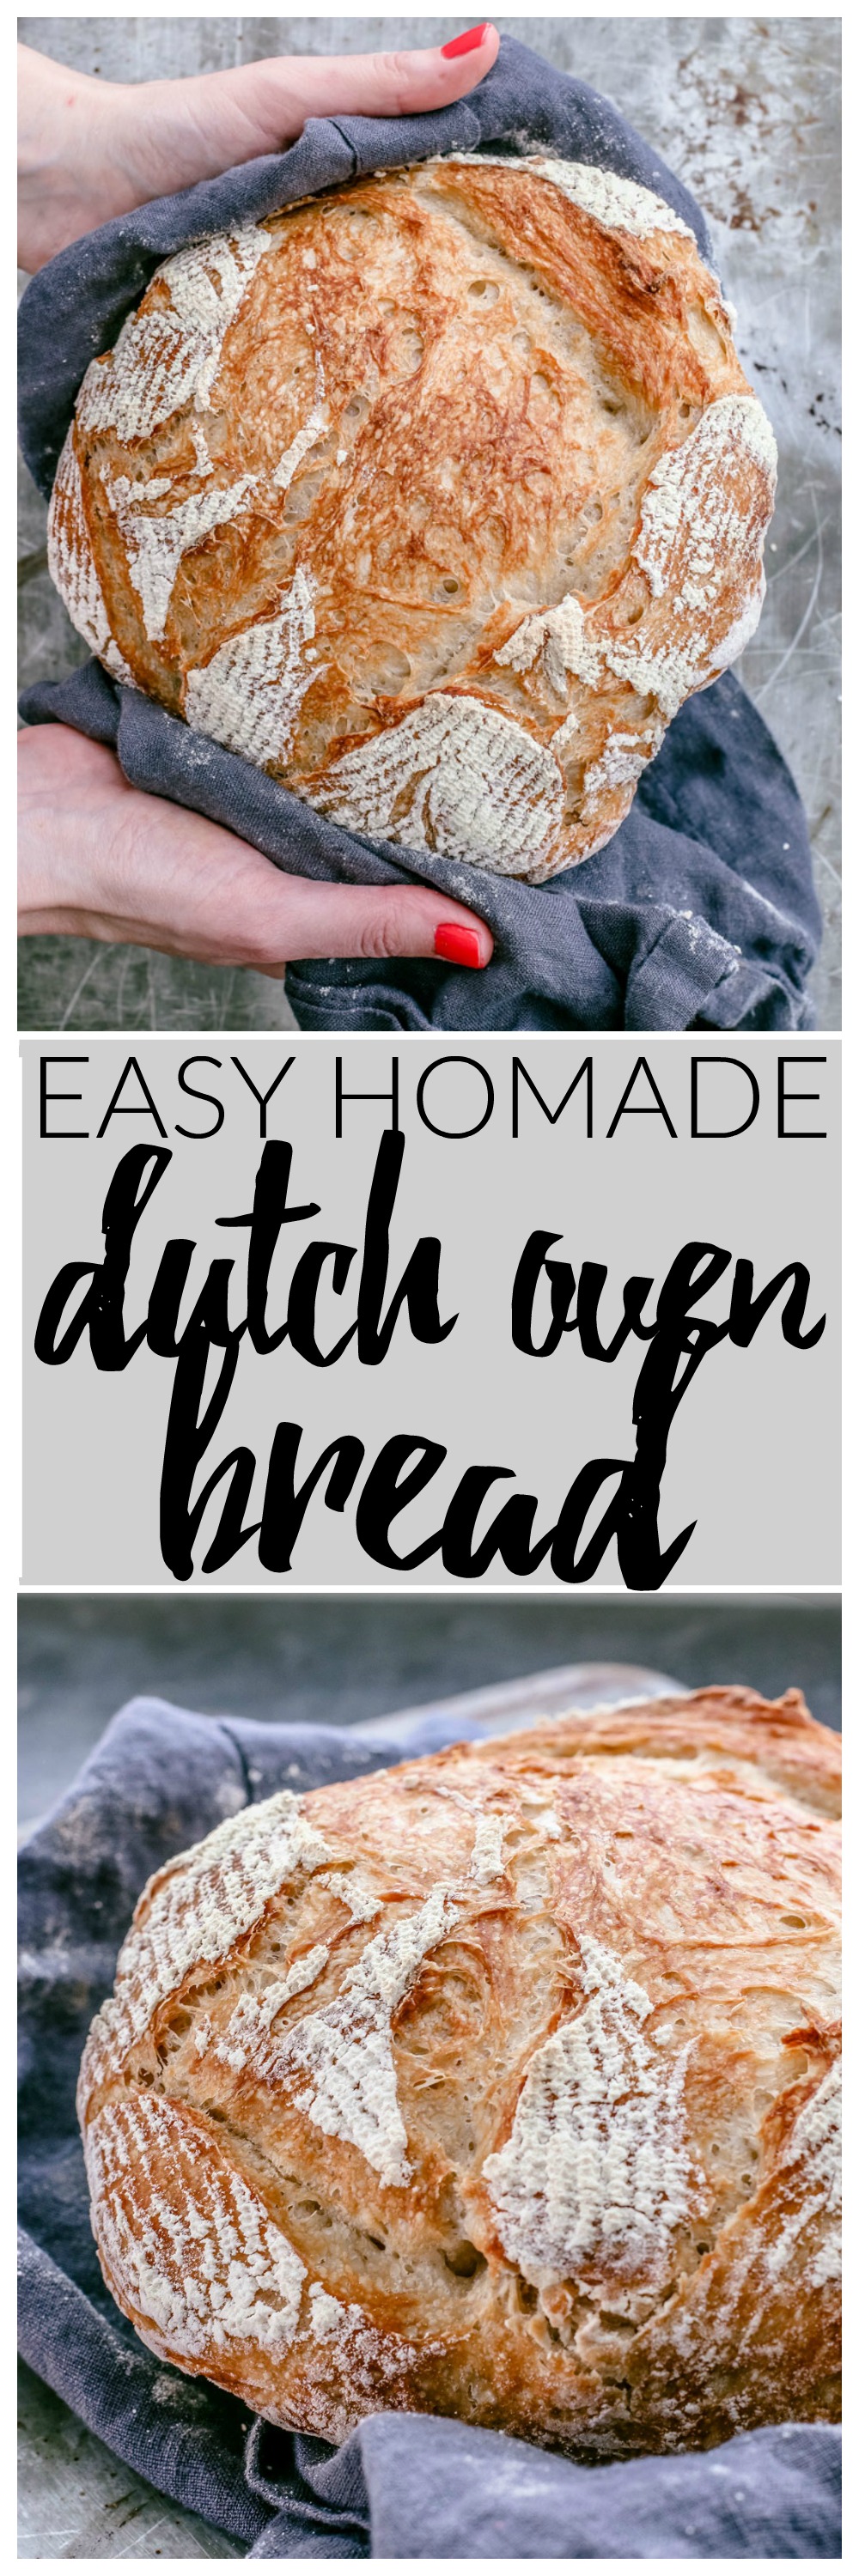 Easy Homemade Dutch Oven Bread | Killing Thyme — You'll get a gorgeous crackly golden brown crust encasing soft and pillowy bread every time.